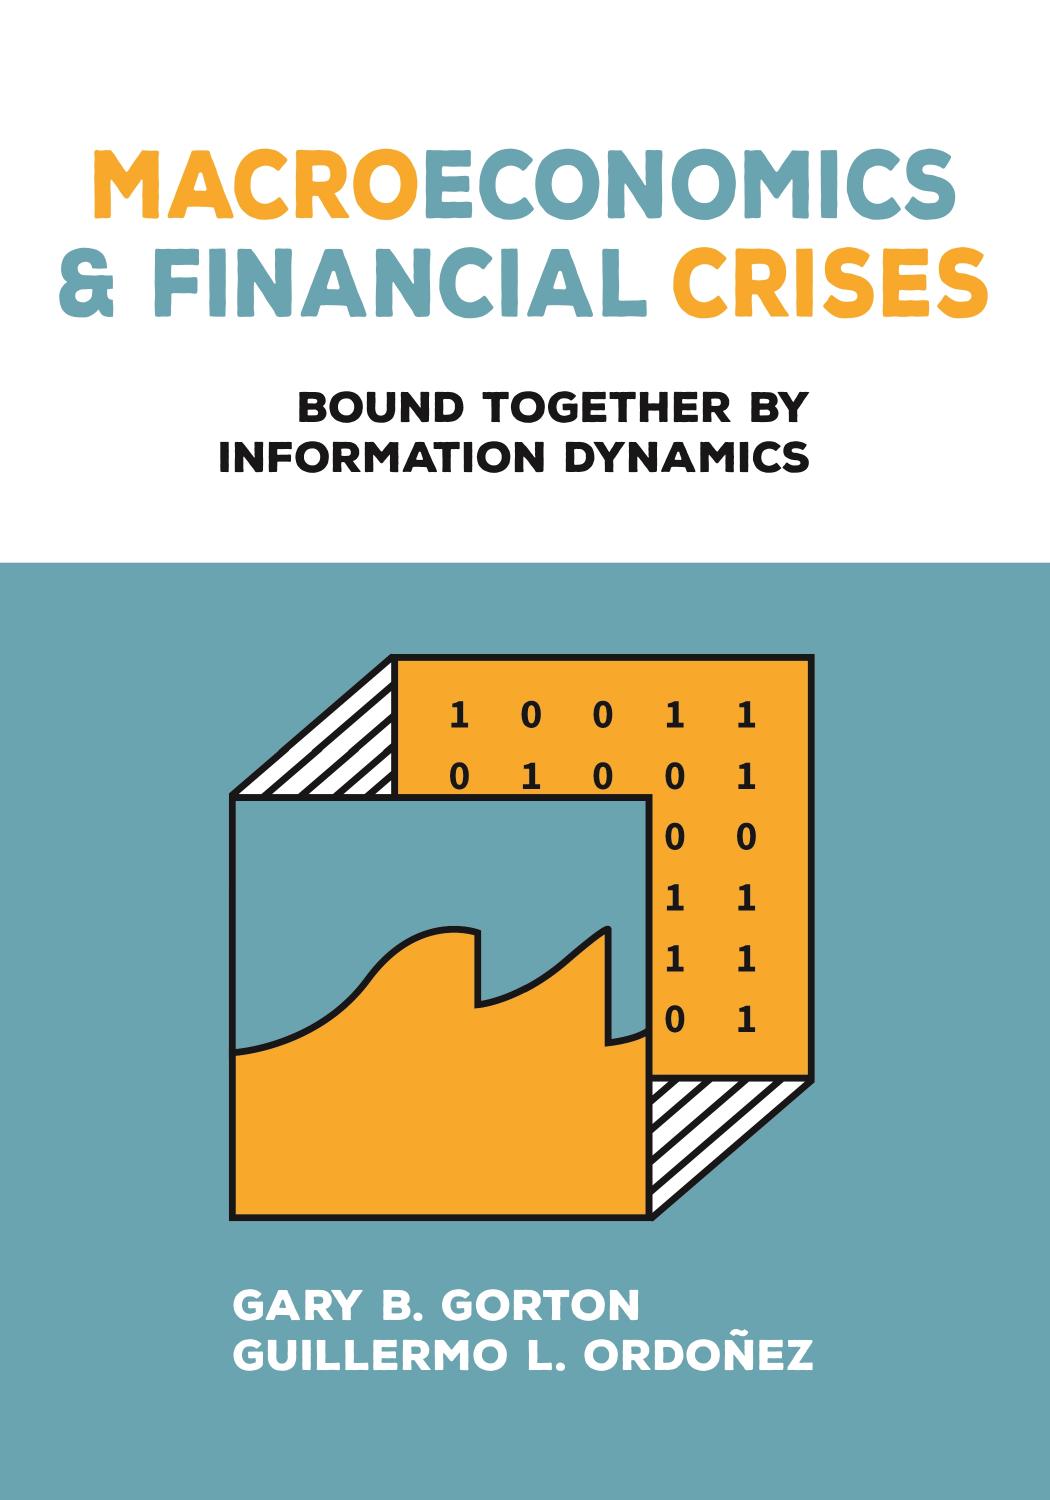 Macroeconomics and Financial Crises Bound Together by Information Dynamics by GARY B. GORTON AND GUILLERMO L. ORDOÑEZ